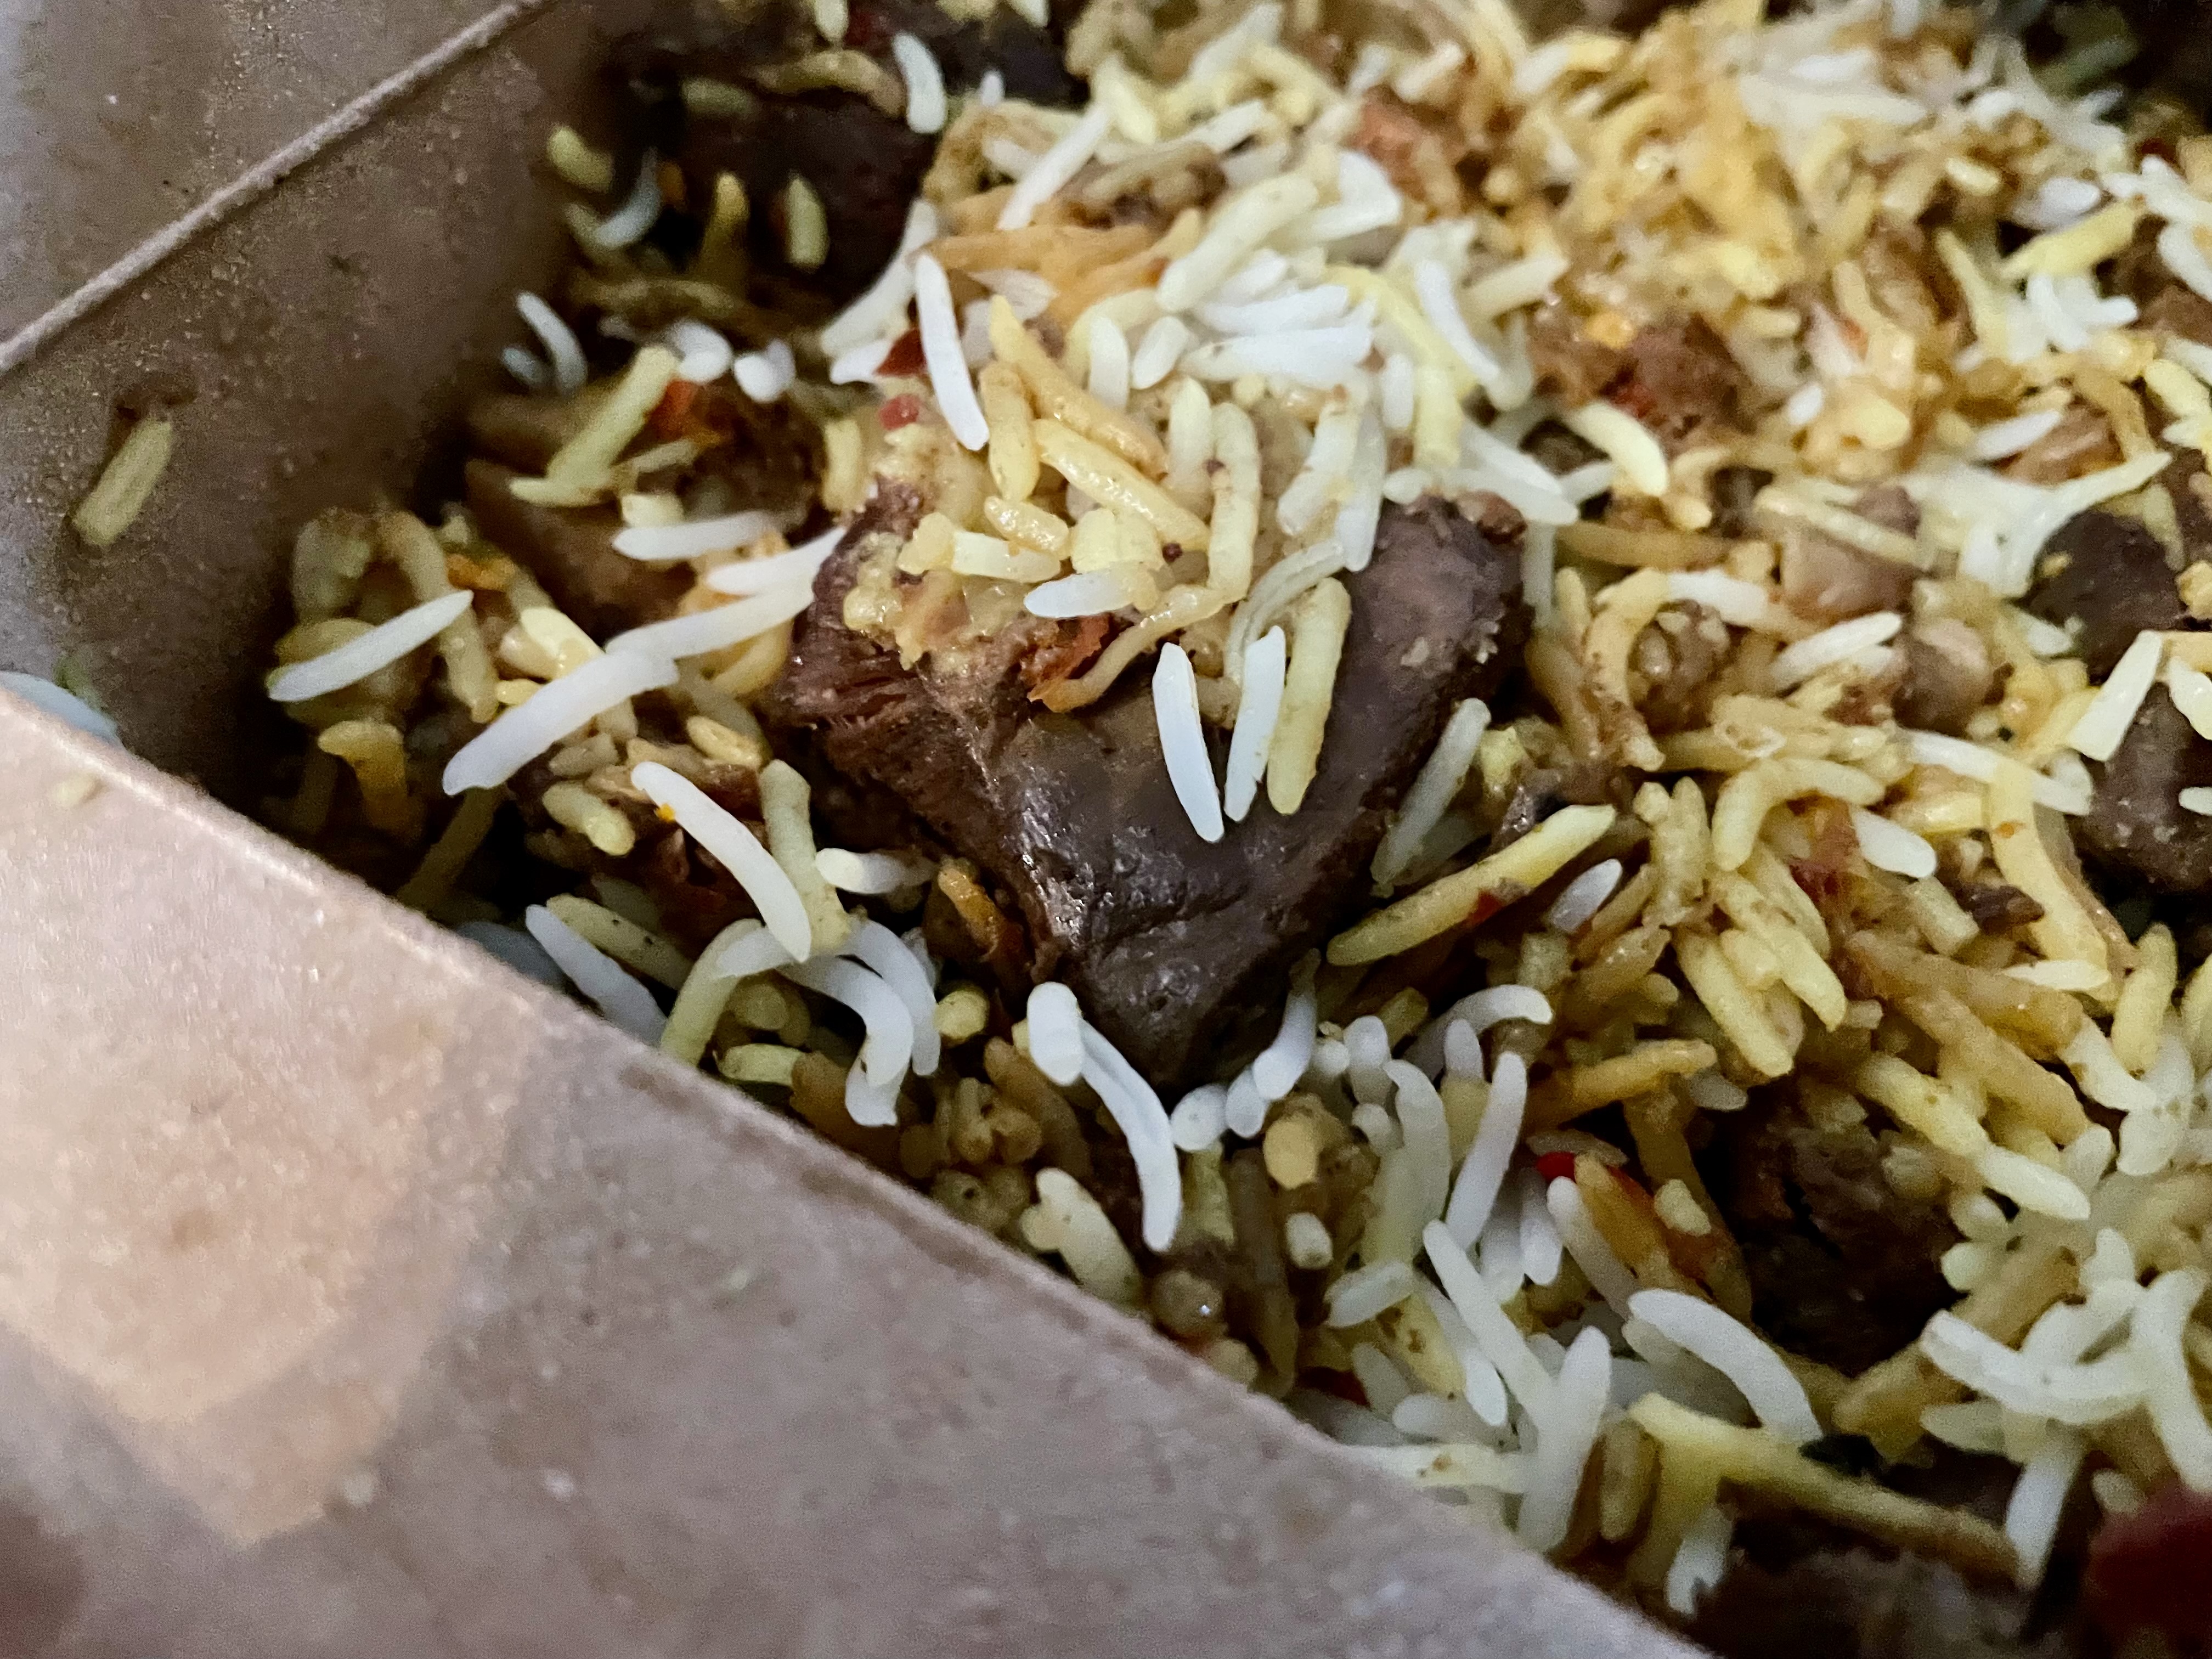 Biryani, one of the most popular dishes in South Asia, is made with rice, some type of protein and spices